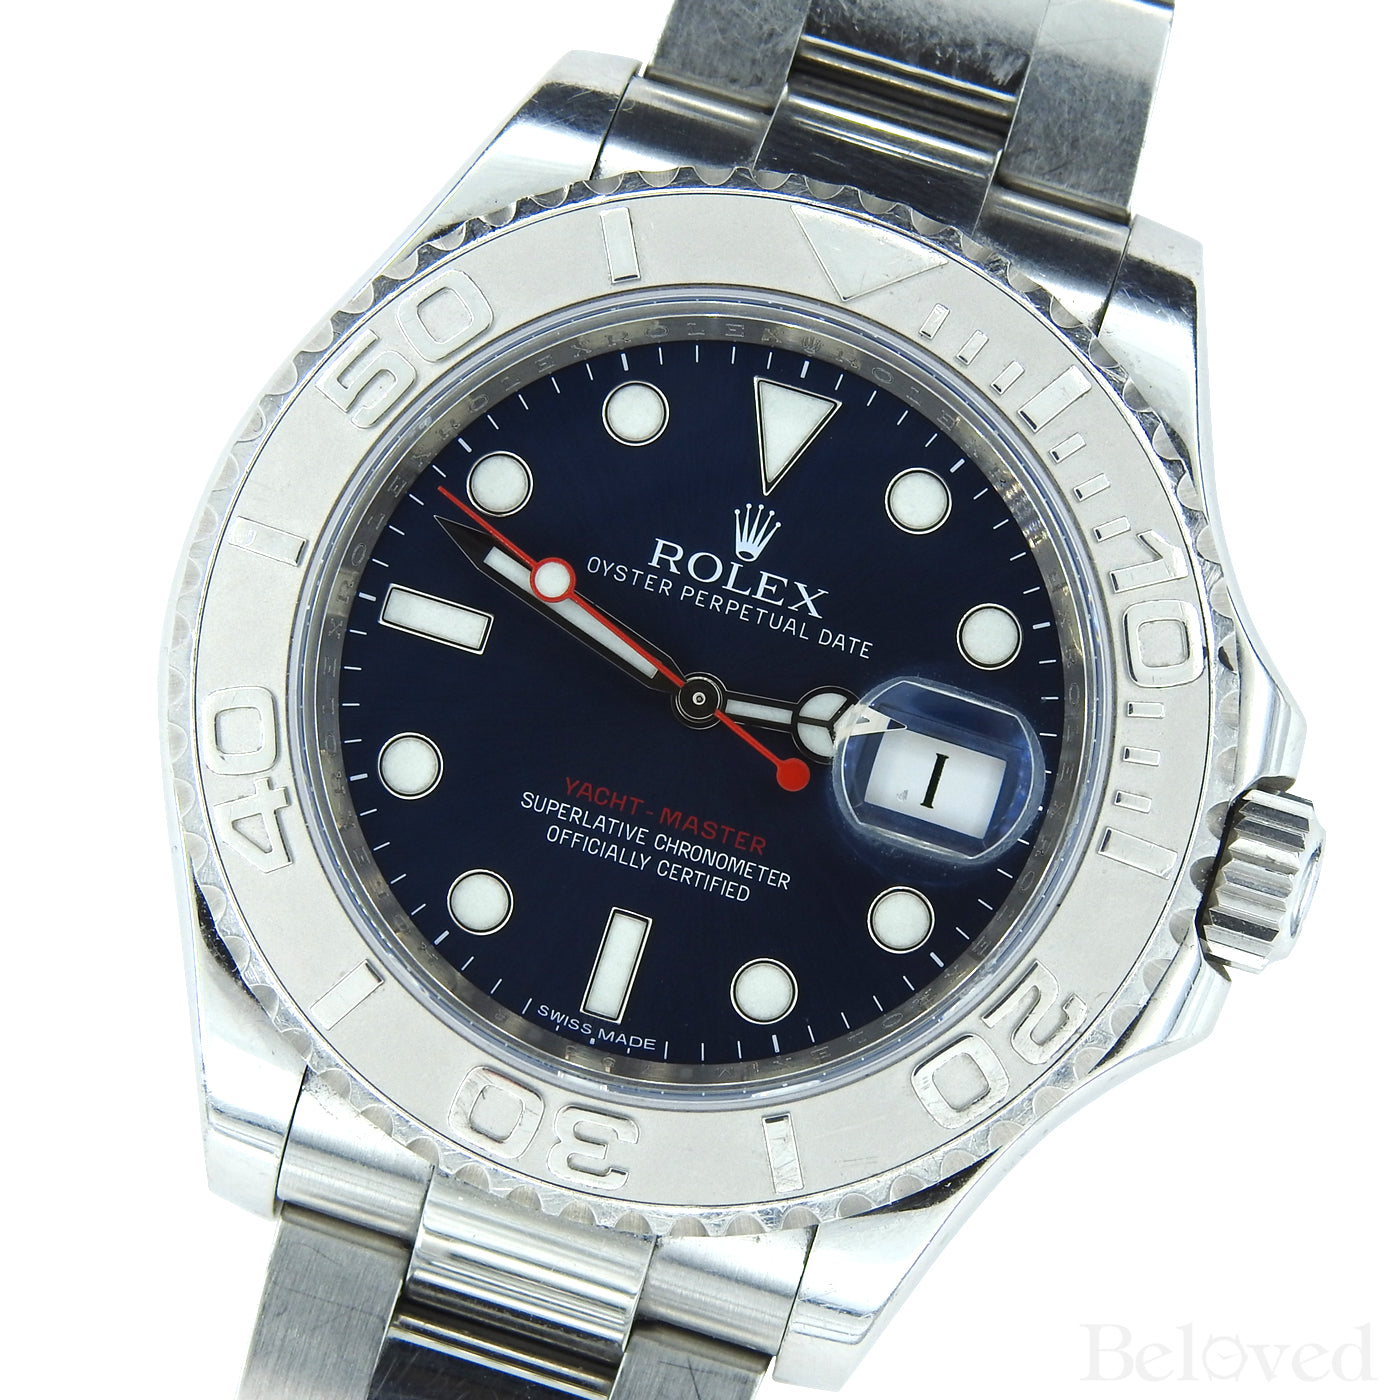 Rolex Yacht-Master 116622 Blue Dial Complete with Warranty Card & Rolex Box Image 4